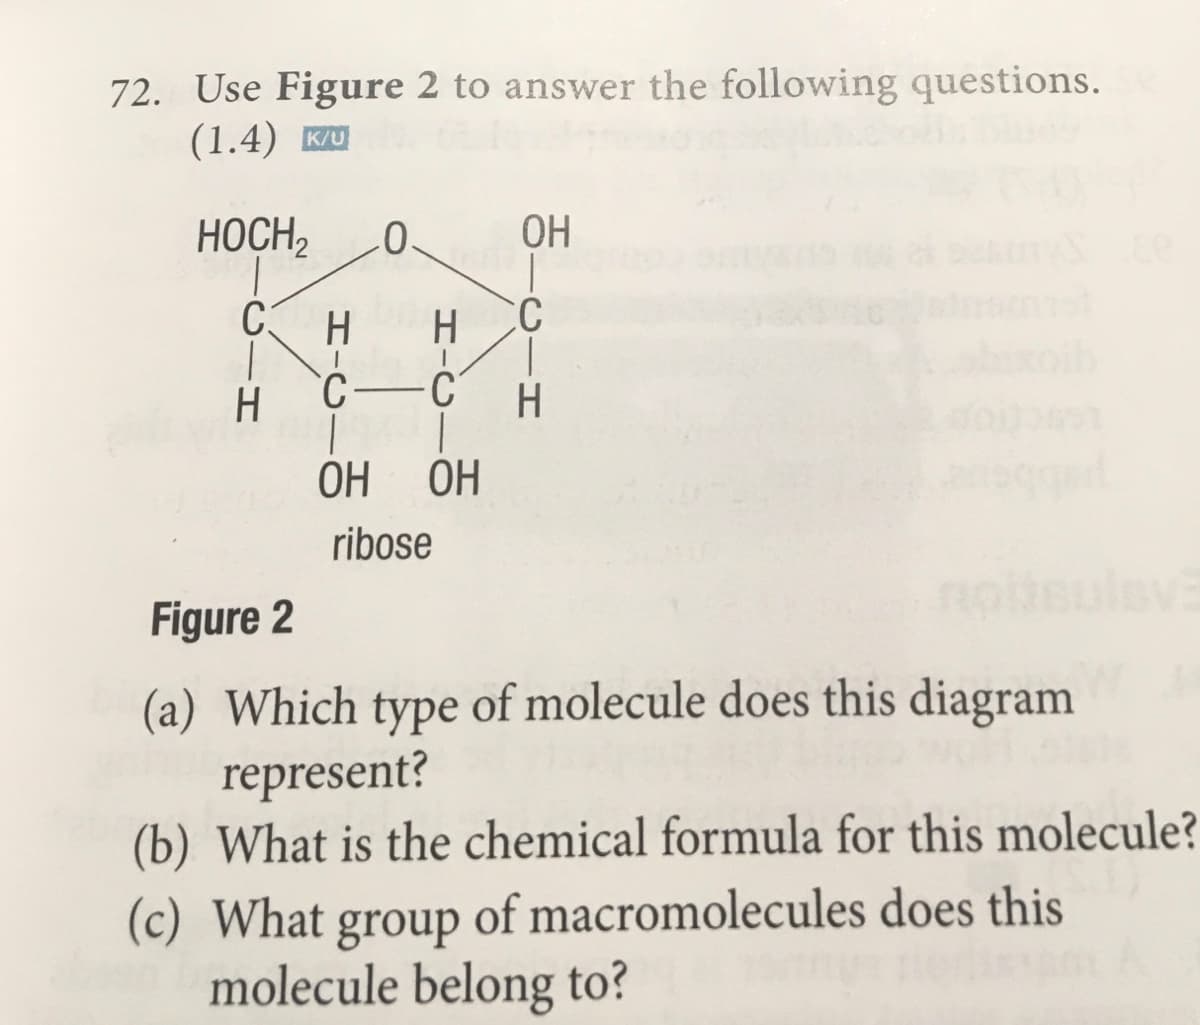 72. Use Figure 2 to answer the following questions.
(1.4) KU
HOCH,
OH
C3
H
C
H
С —
H
ОН
ОН
ribose
Figure 2
(a) Which type of molecule does this diagram
represent?
(b) What is the chemical formula for this molecule?
of macromolecules does this
(c) What
group
molecule belong to?
エーO
エ-O
